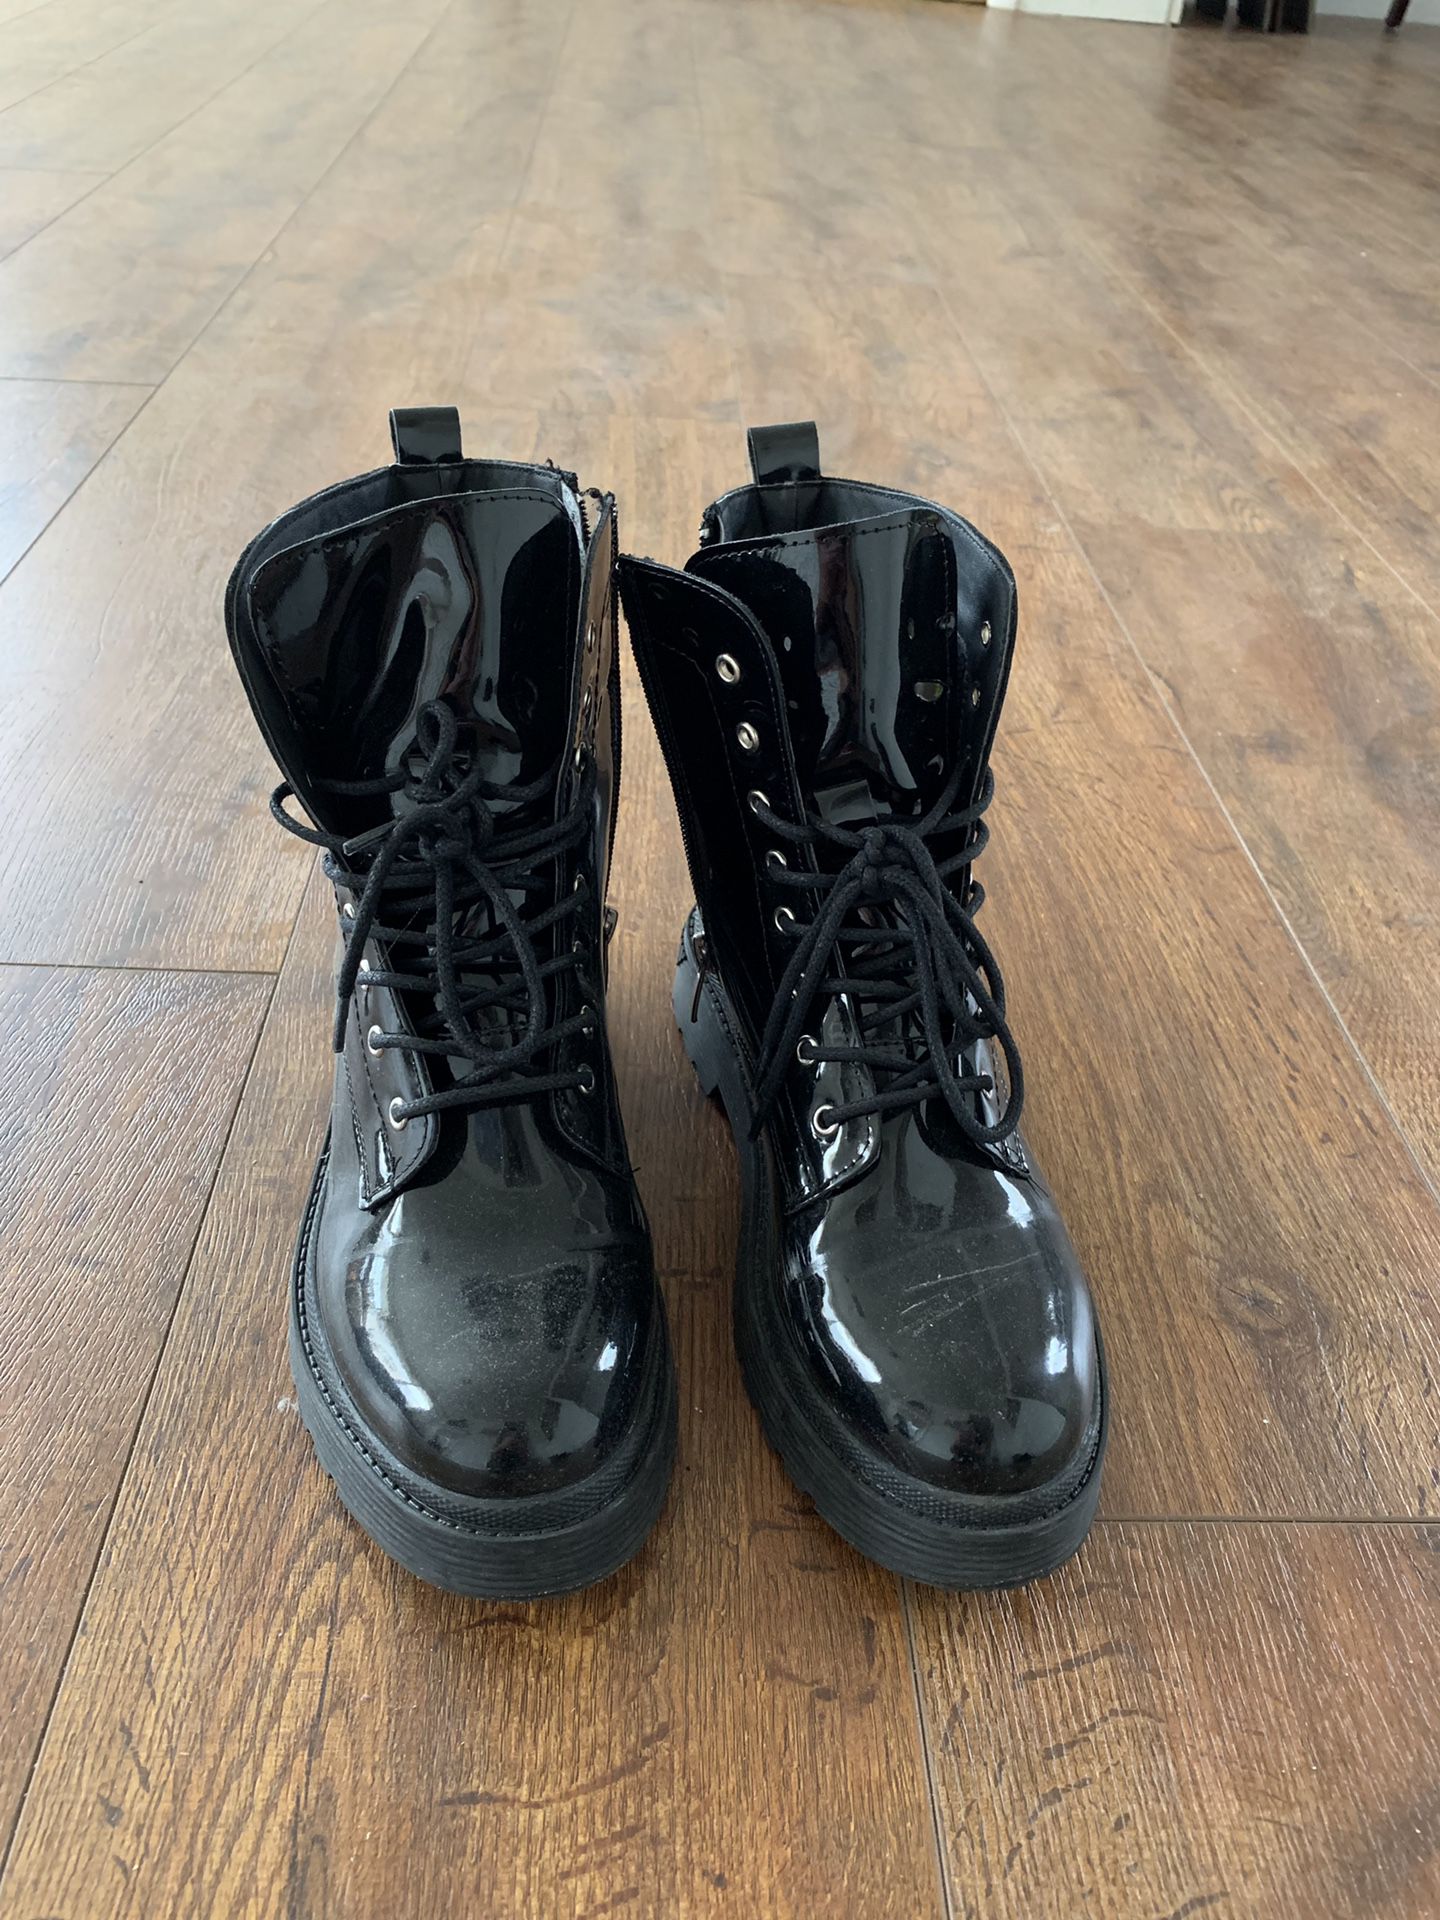 Black patent leather boots (size 8)